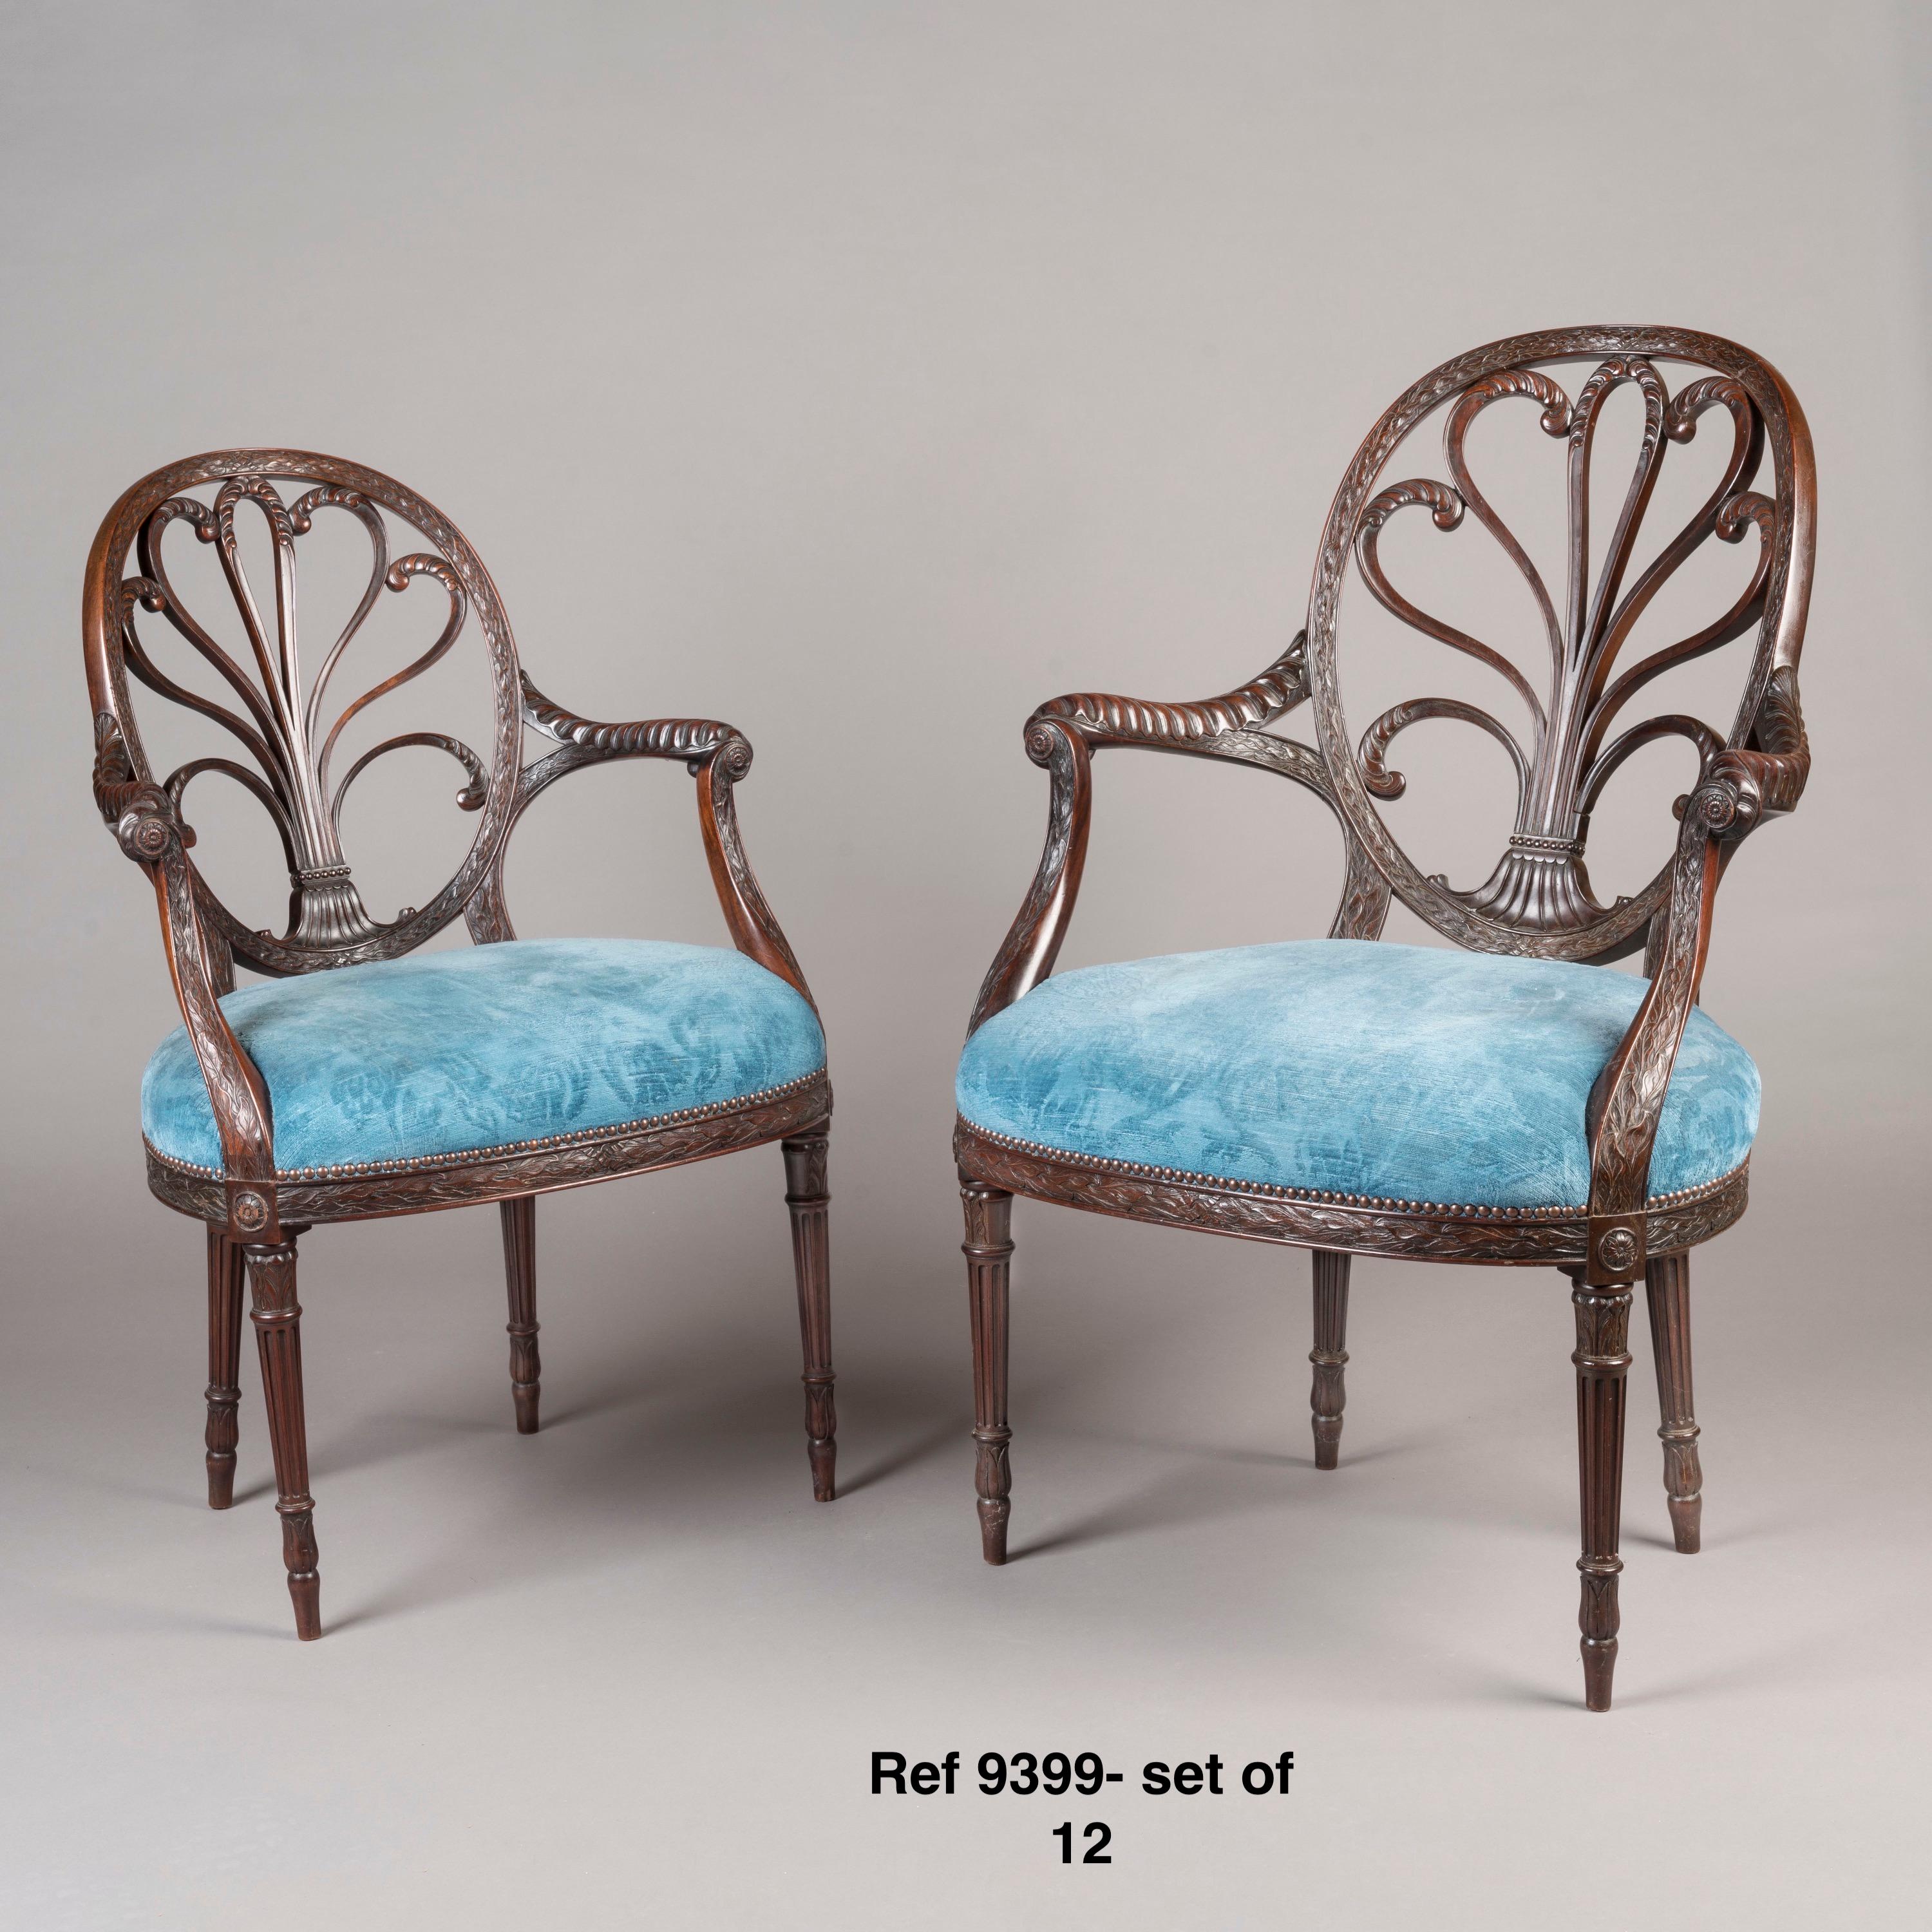 Neoclassical Revival A Rare set of 12 Carved Mahogany Neo-Classical Revival Dining Chairs  For Sale